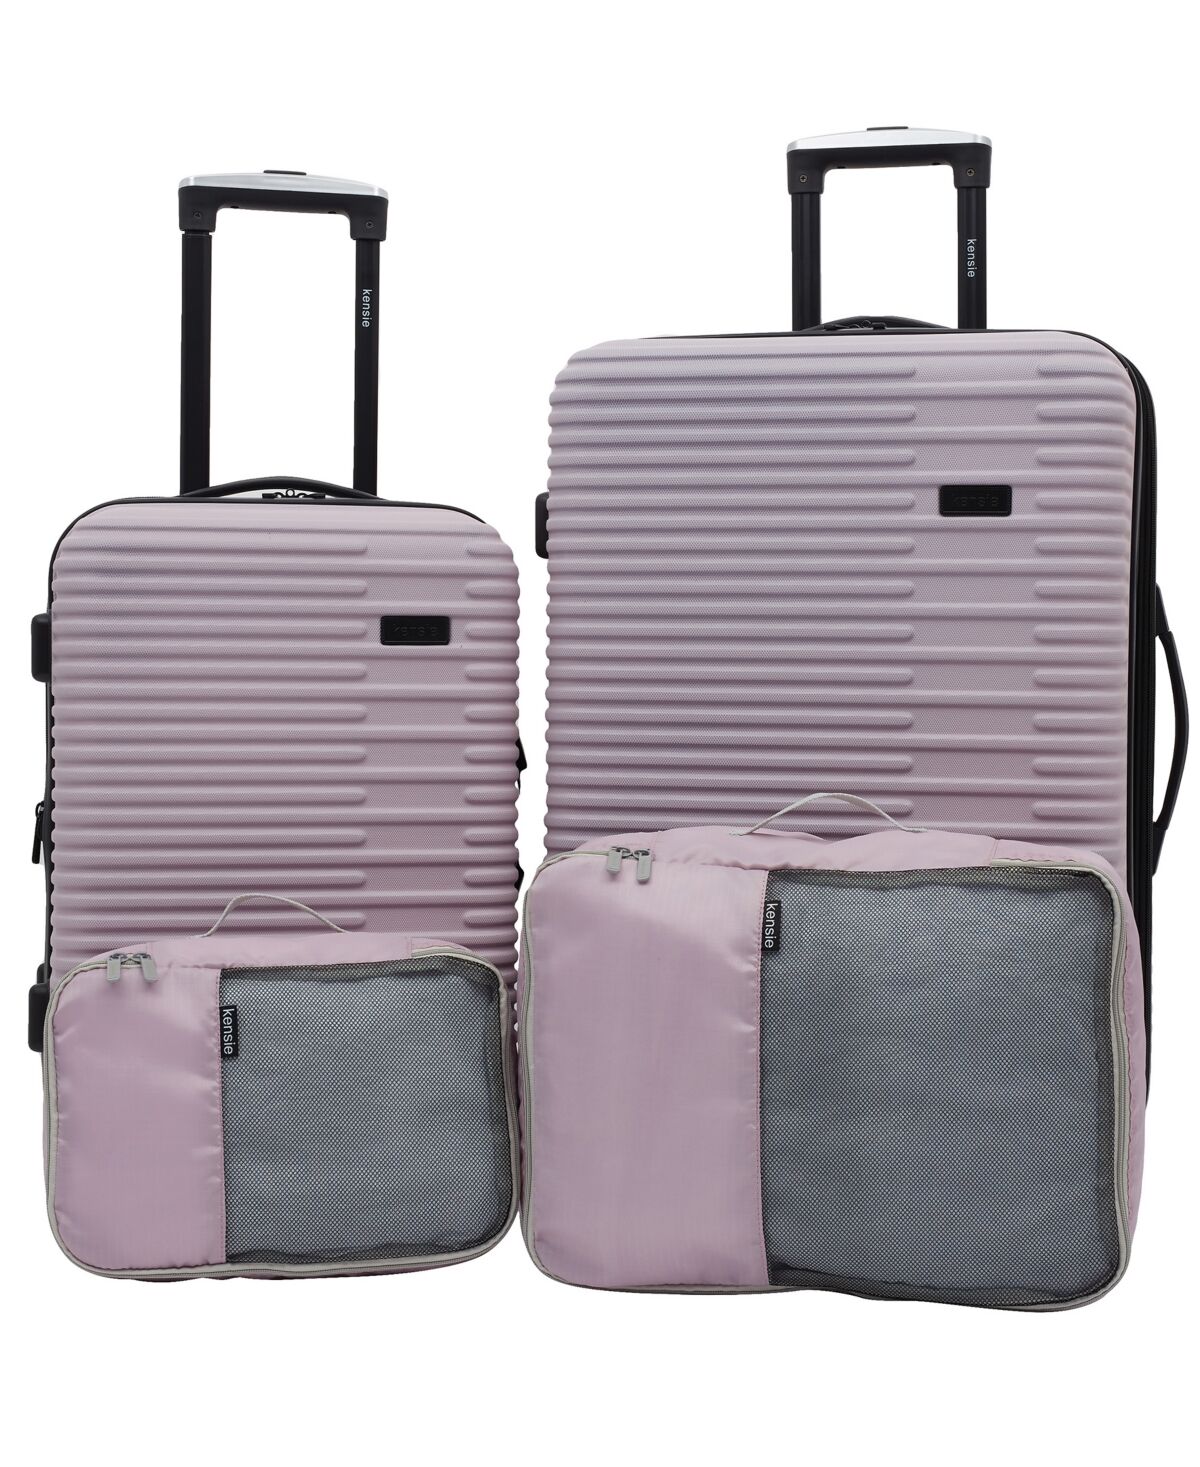 Kensie Hillsboro Expandable Rolling Hardside Collection Set, 4 Piece - Burnished Lilac